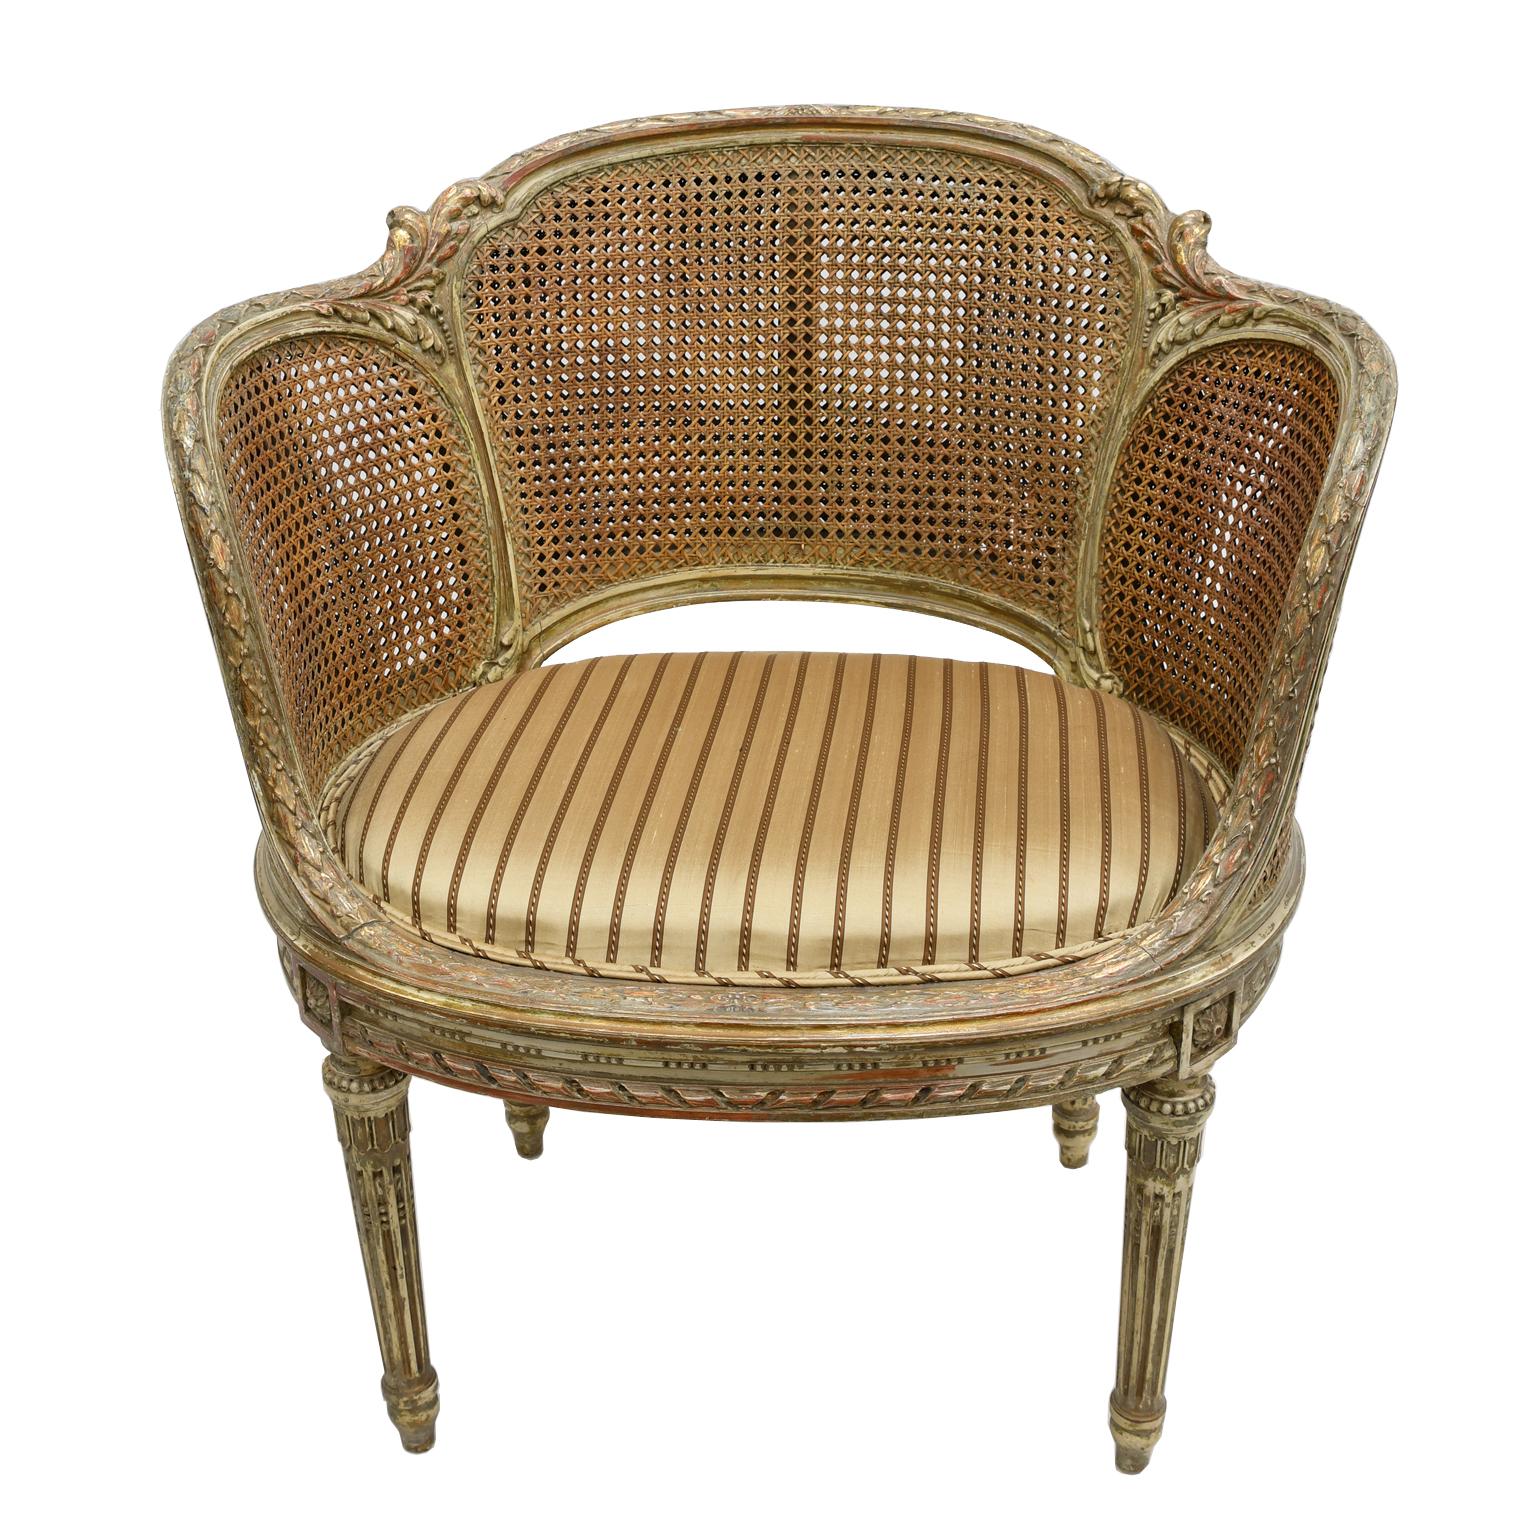 Antique French Louis XVI Style Polychrome and Gilt Barrel Desk Chair with Caning 3